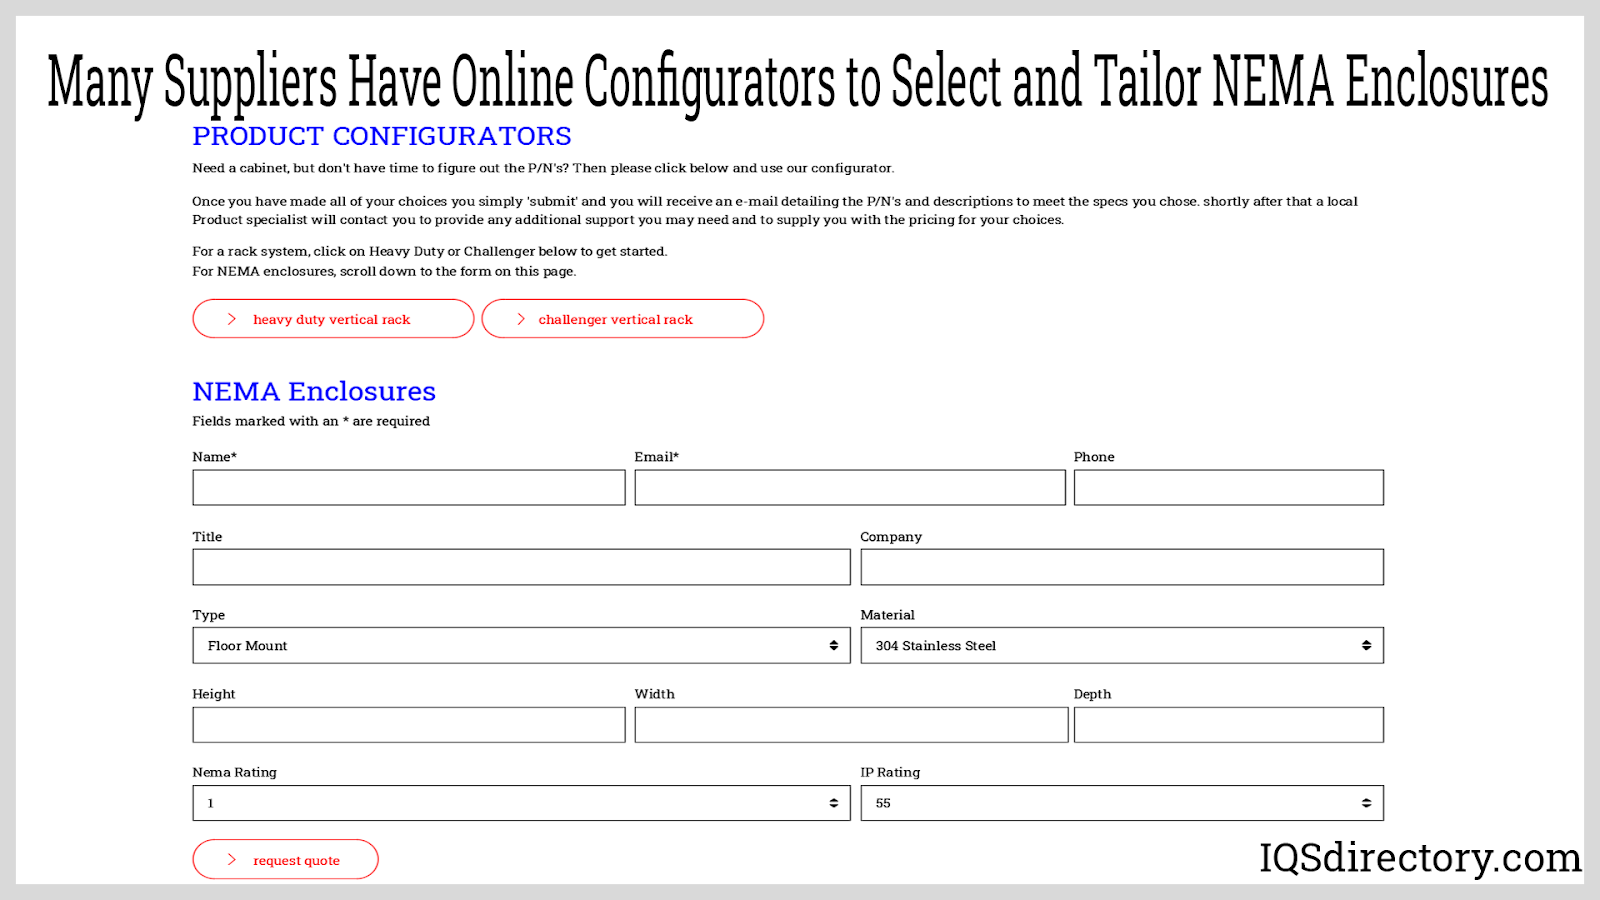 Many Suppliers Have Online Configurators to Select and Tailor NEMA Enclosuresfor Your Application